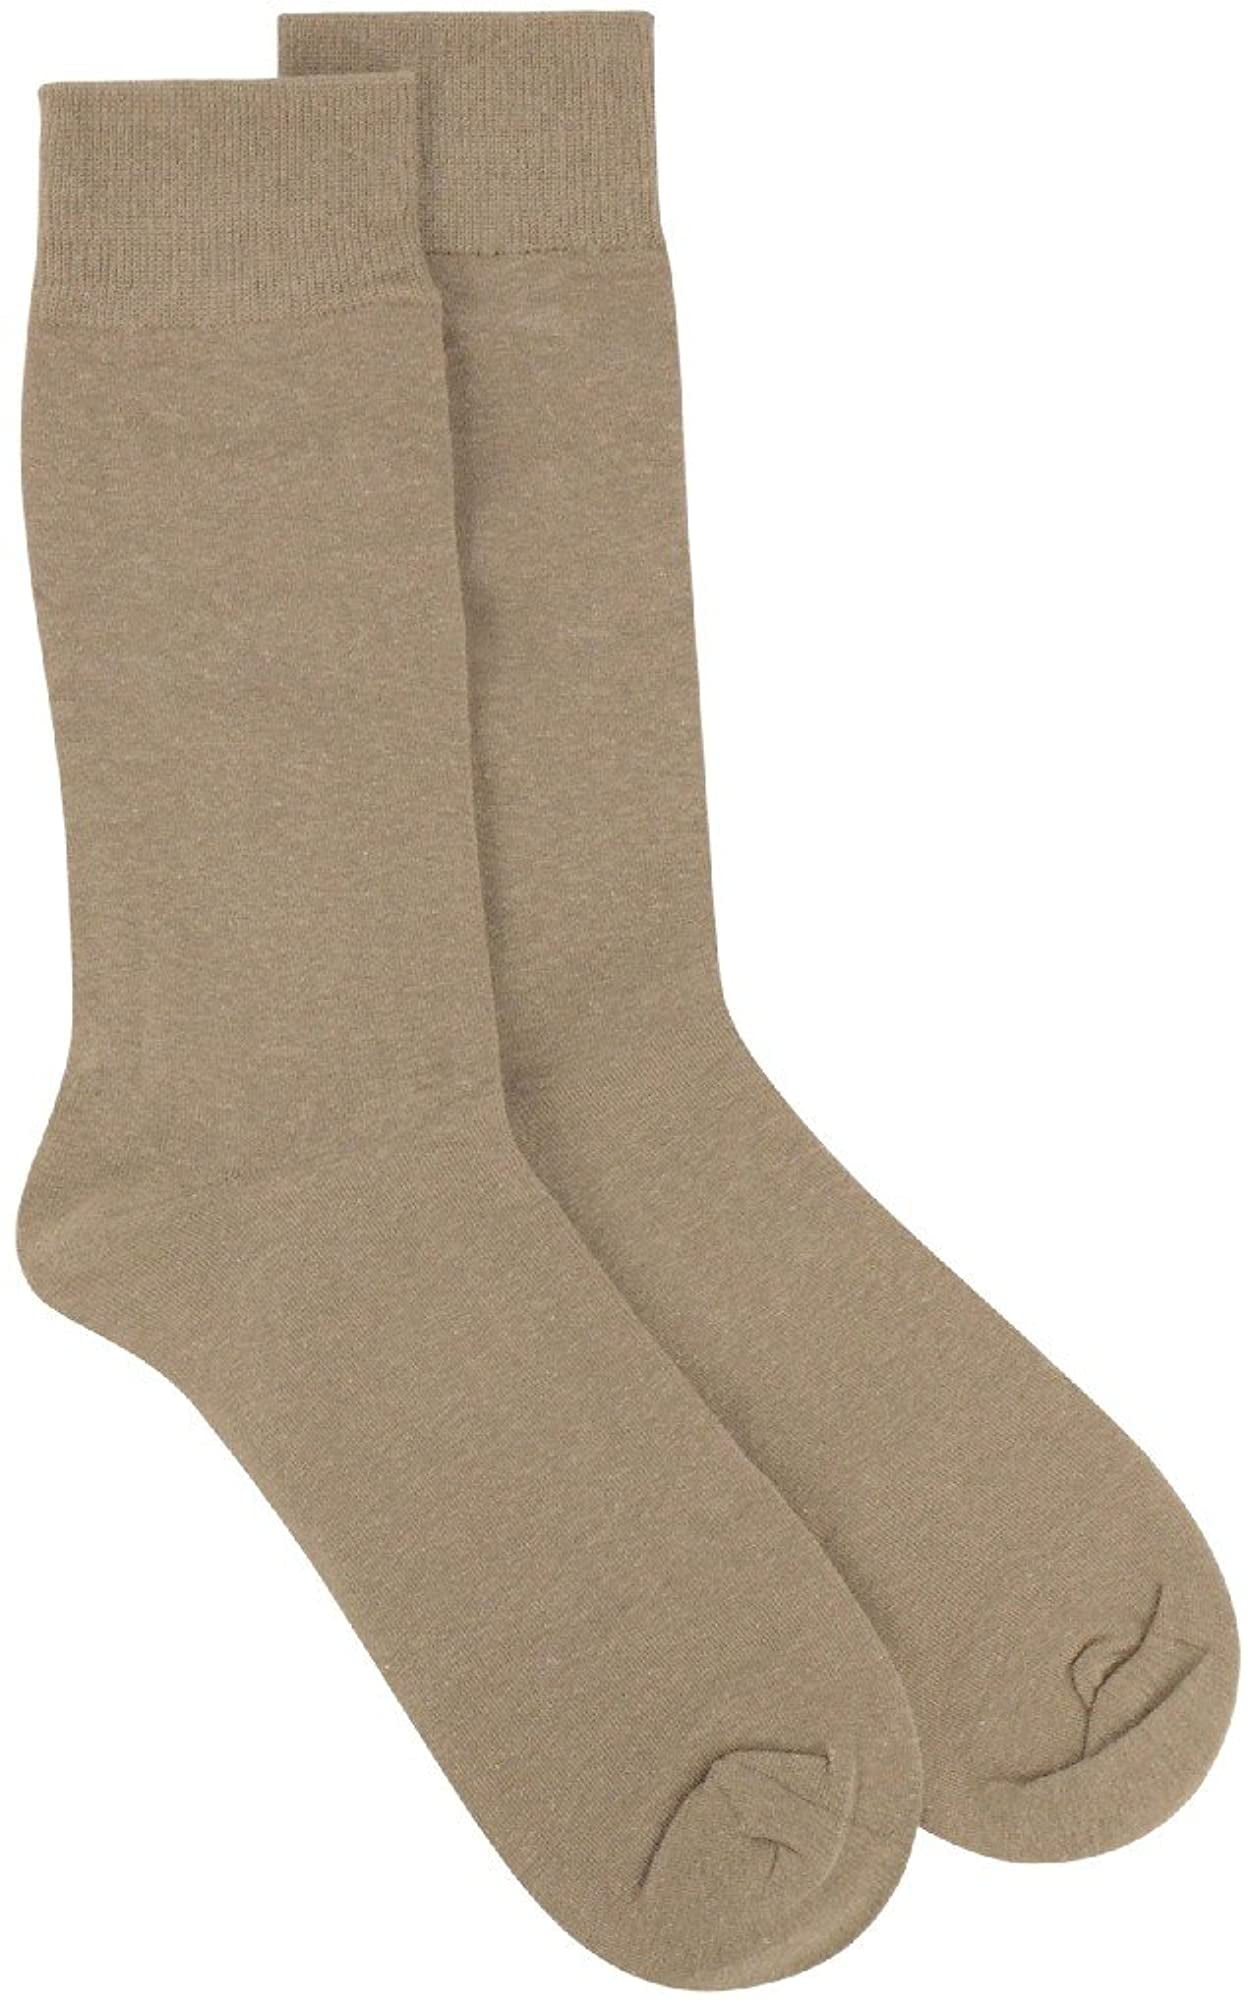 3 Pair of Biagio Solid TAUPE LIGHT BROWN Color Mens COTTON Dress SOCKS